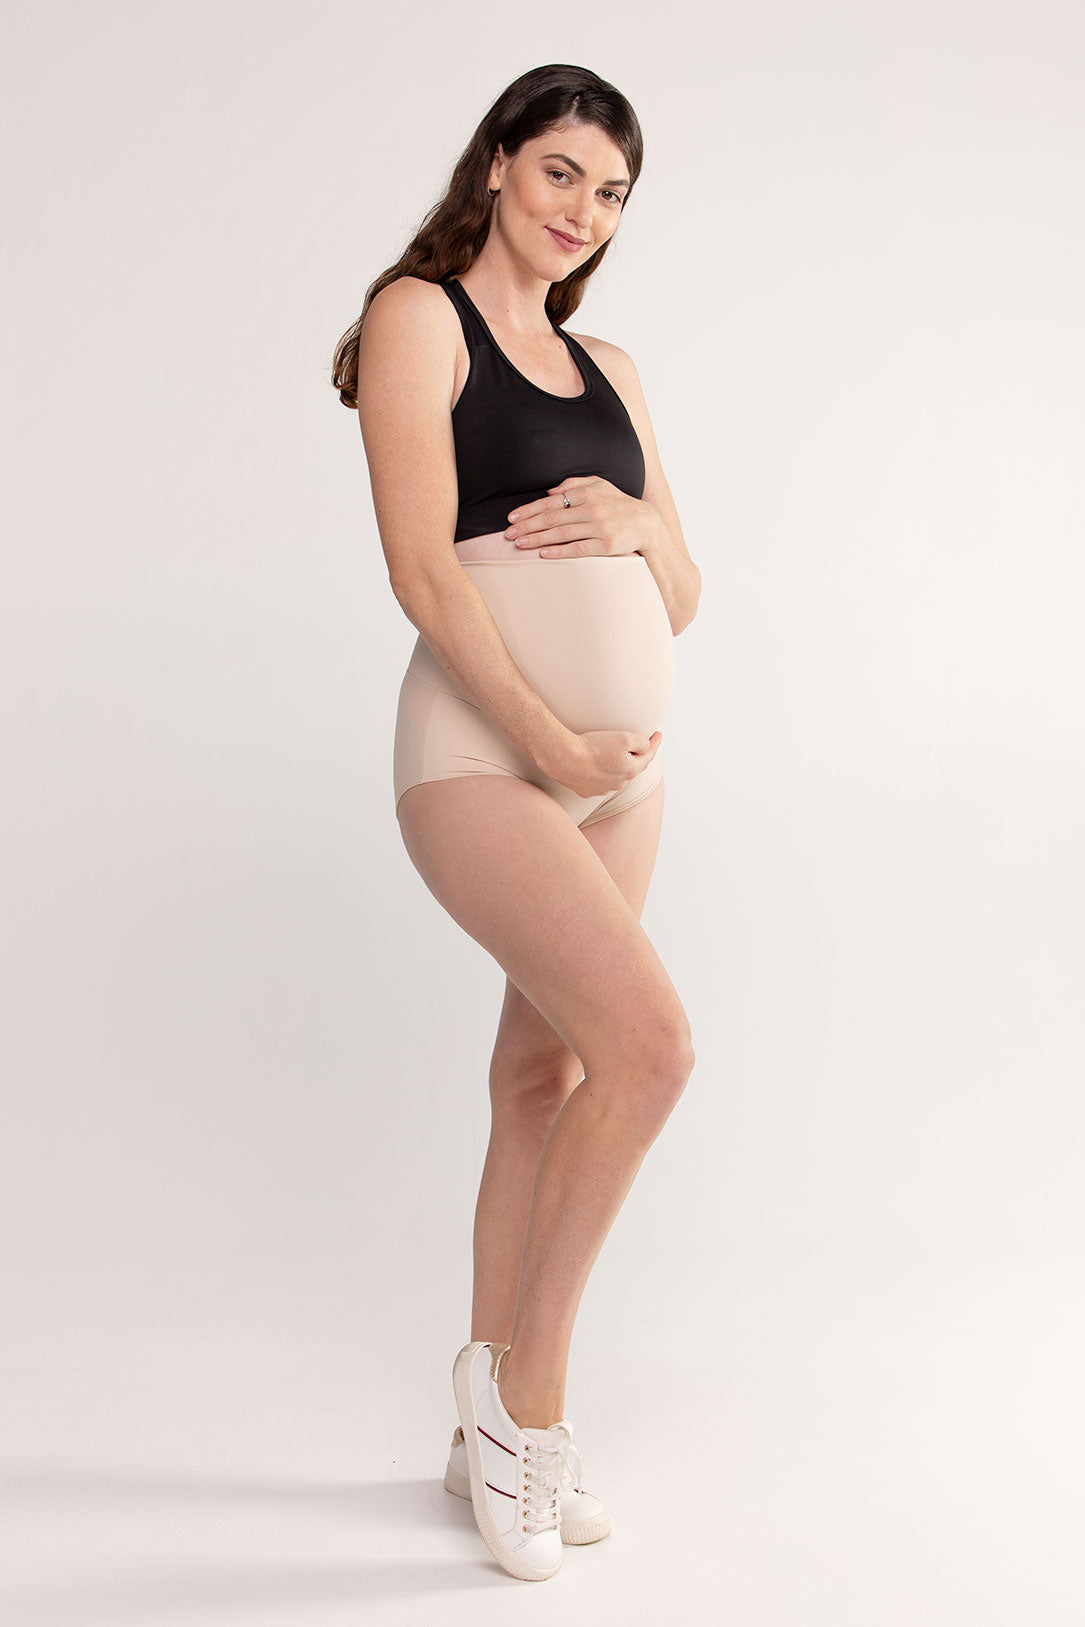 Pregnancy Support Brief in Beige, Maternity, Active Truth